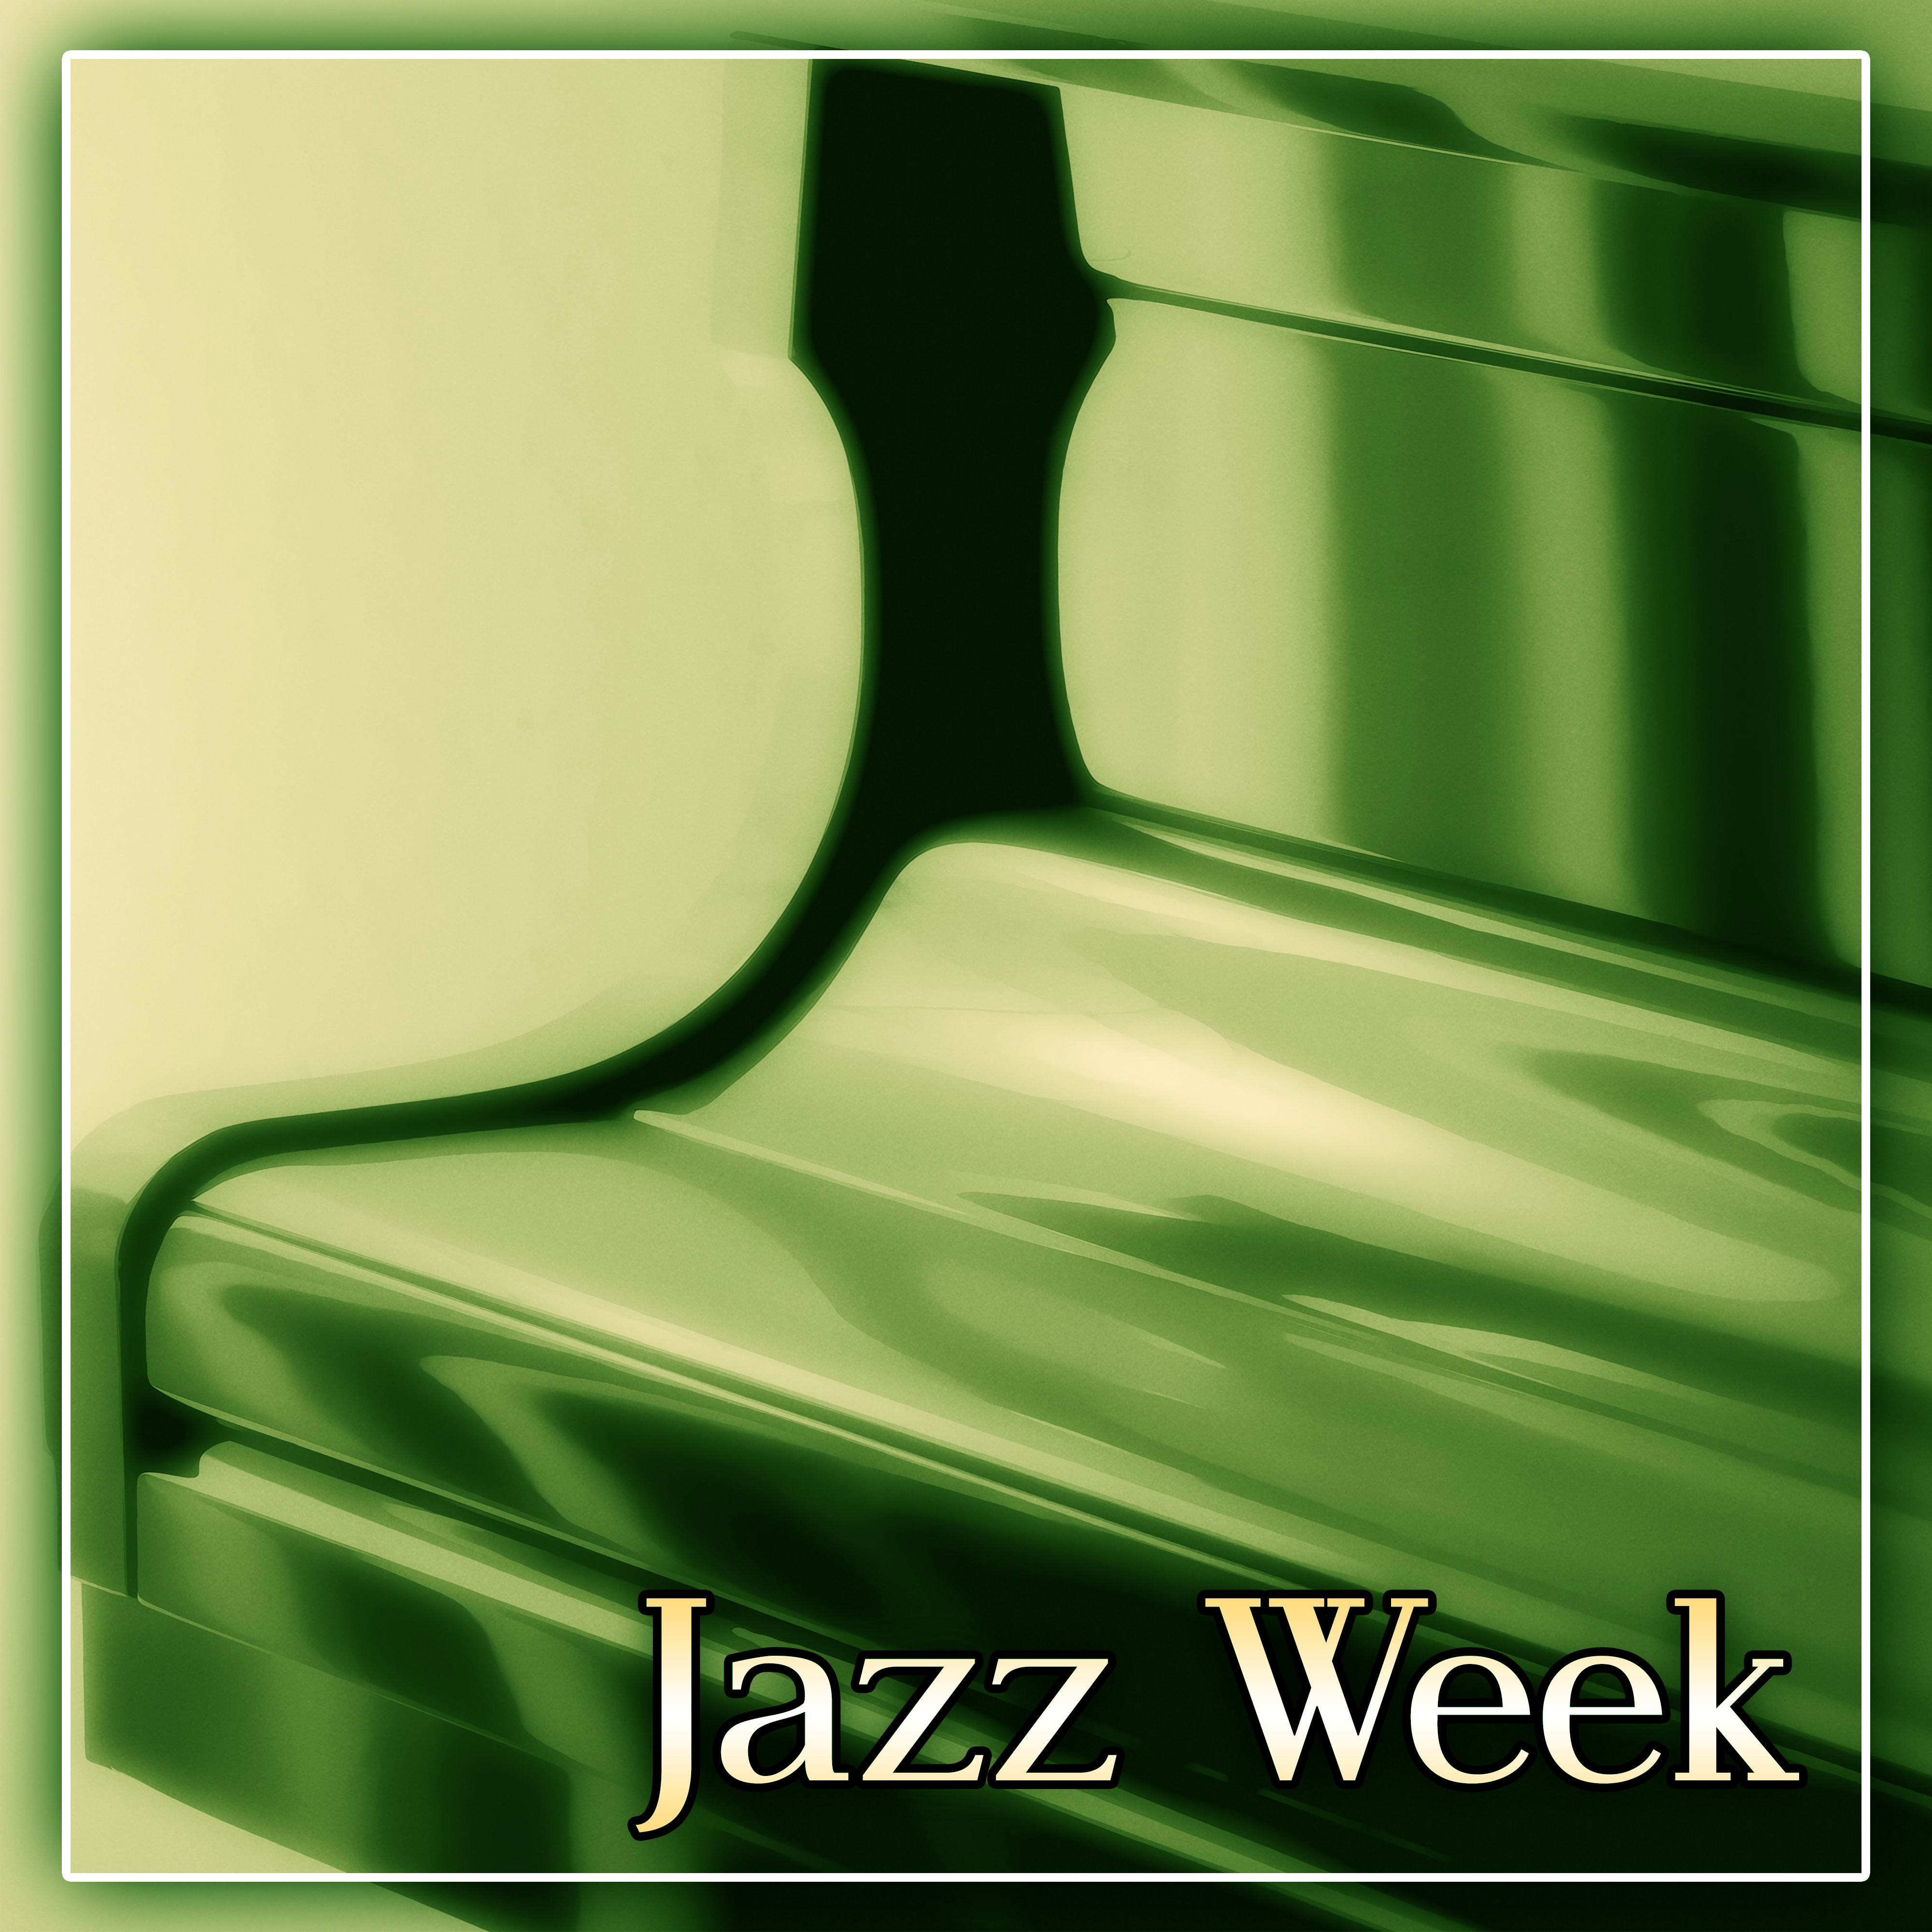 Jazz Week – Best Jazz Week Music for Restaurant, Relaxing Time for Family Dinner, Smooth Jazz, Calming Piano Bar